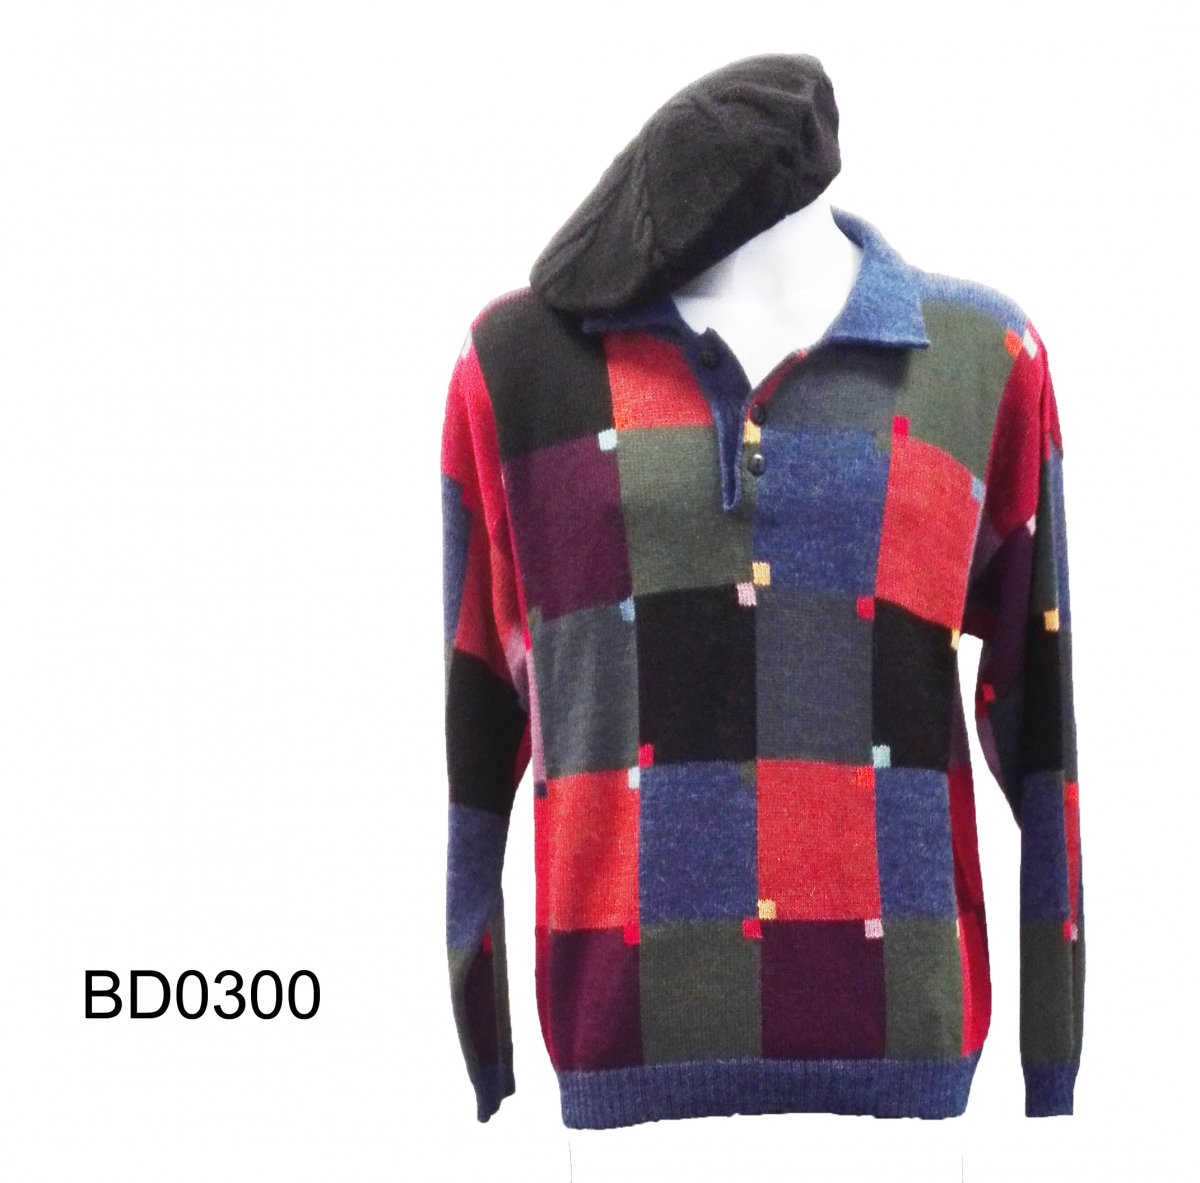 Alpaca Polo Sweater for Men or Women "Squares"